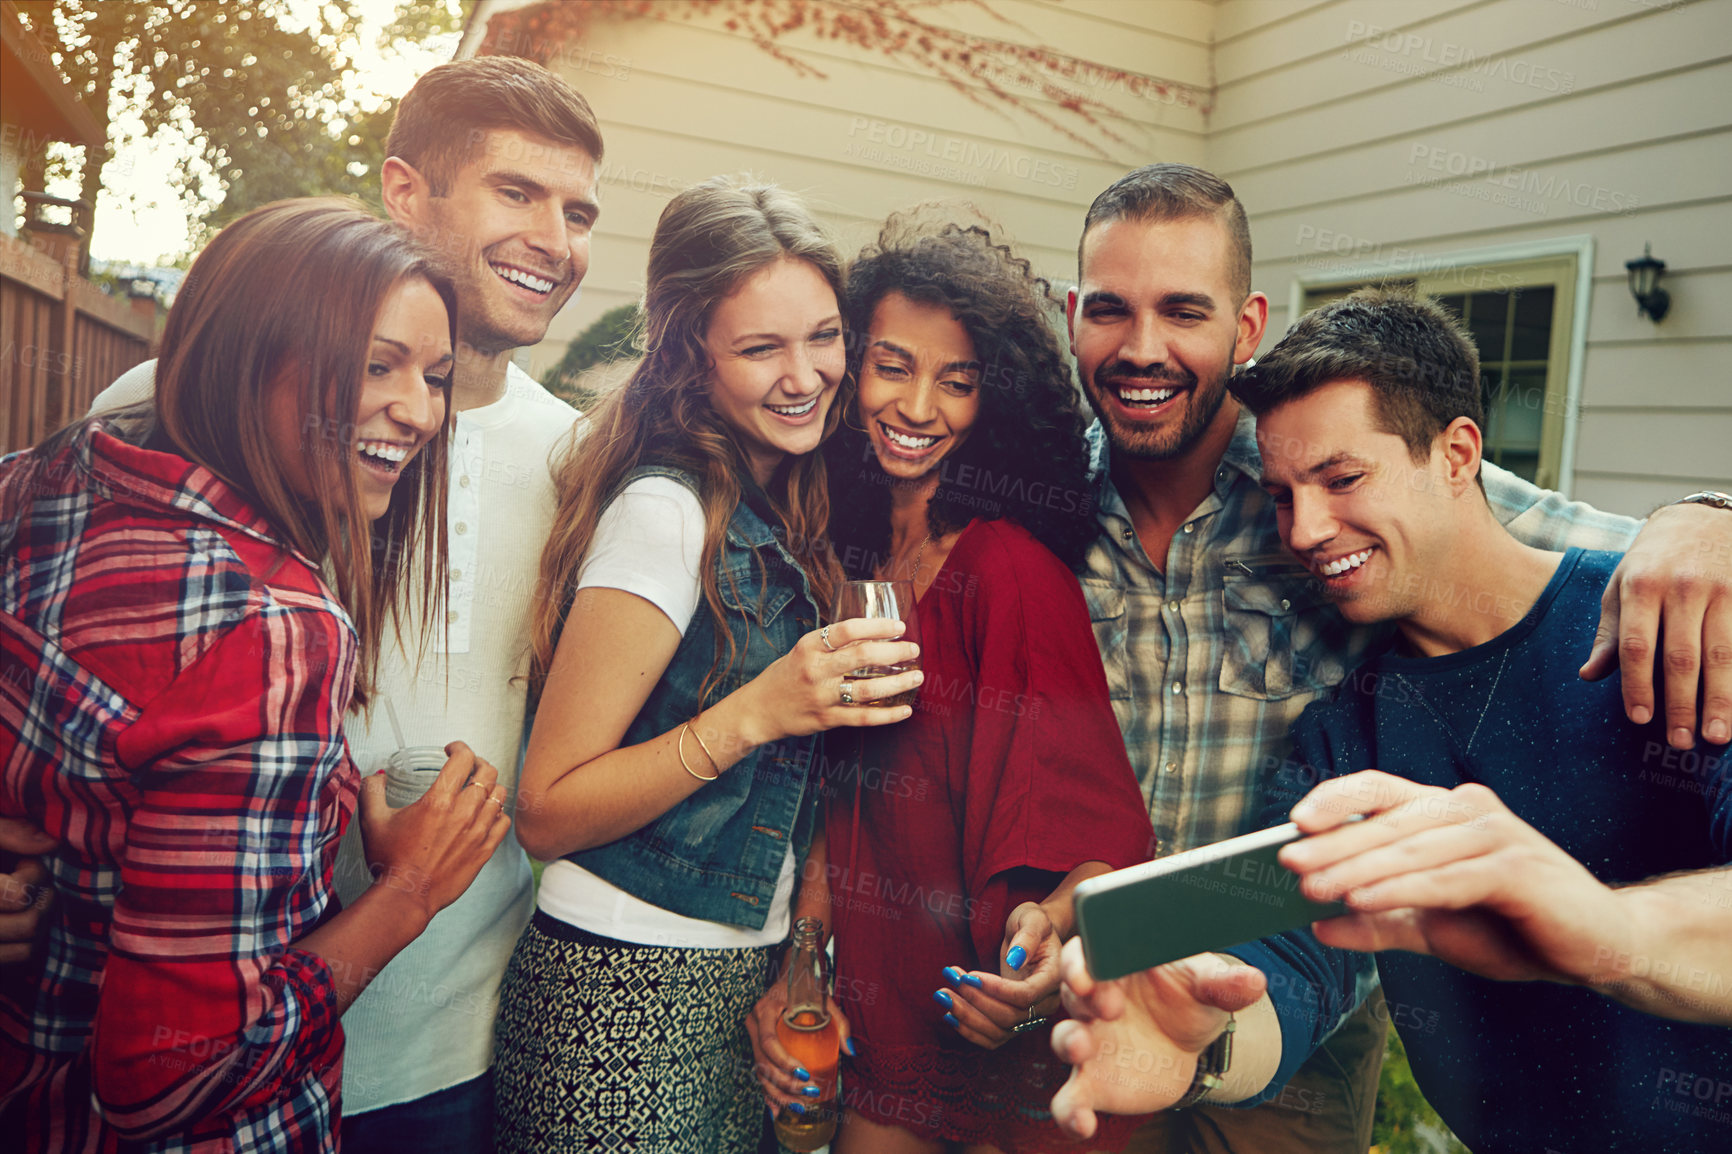 Buy stock photo Shot of a group of friends taking a selfie outside